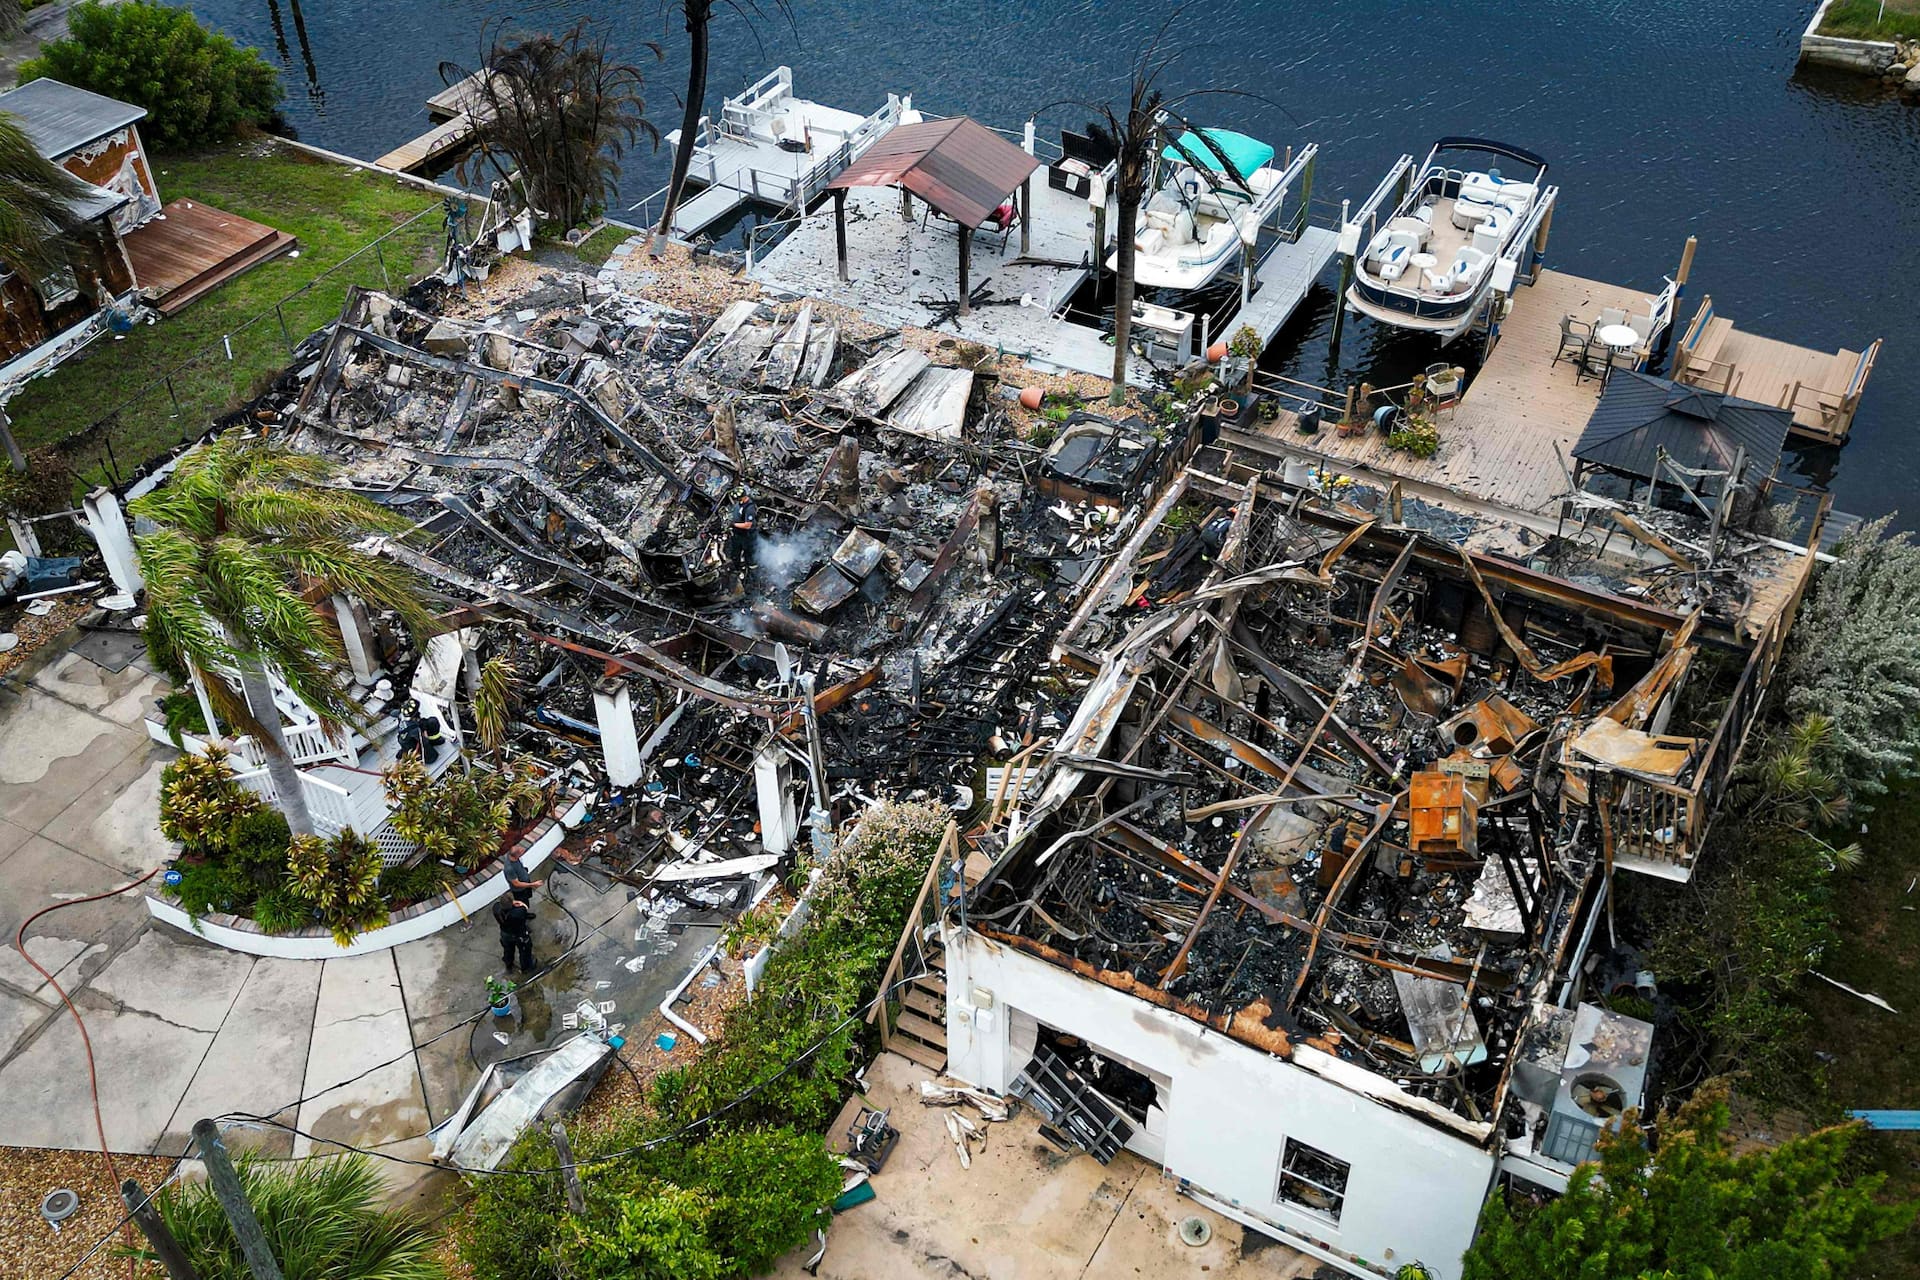 Pictures of the devastation in Florida after Hurricane Adalia